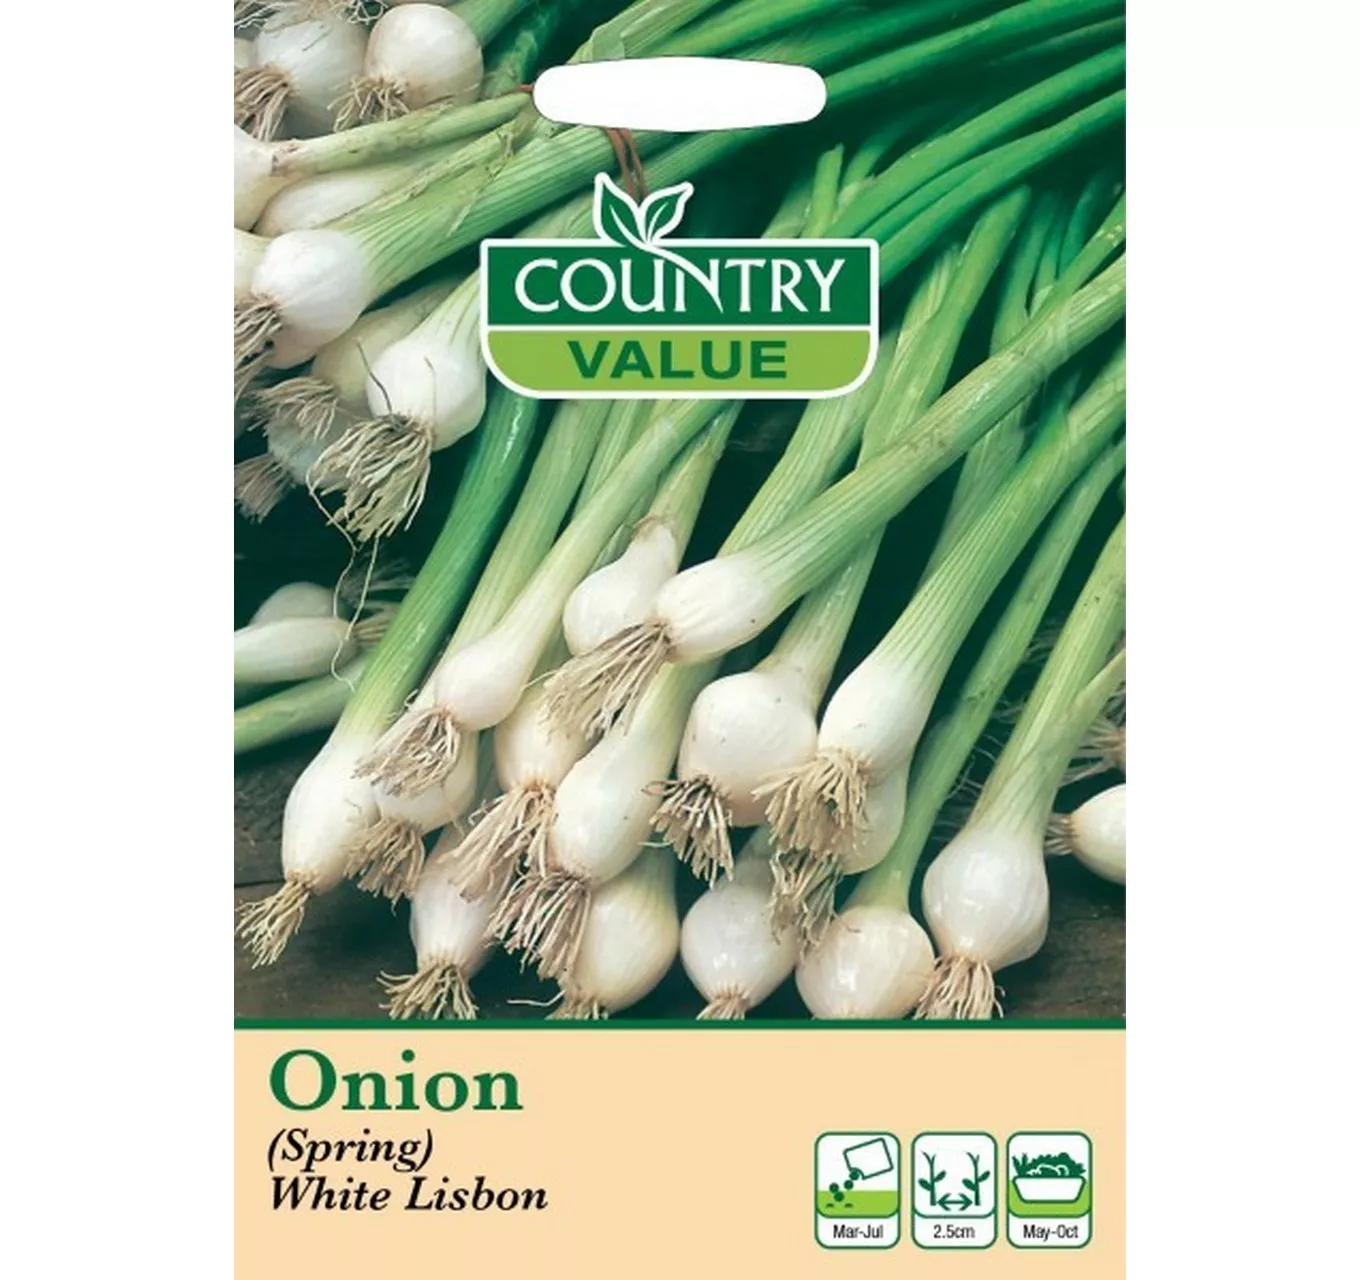 Onion (Spring) White Lisbon Country Value